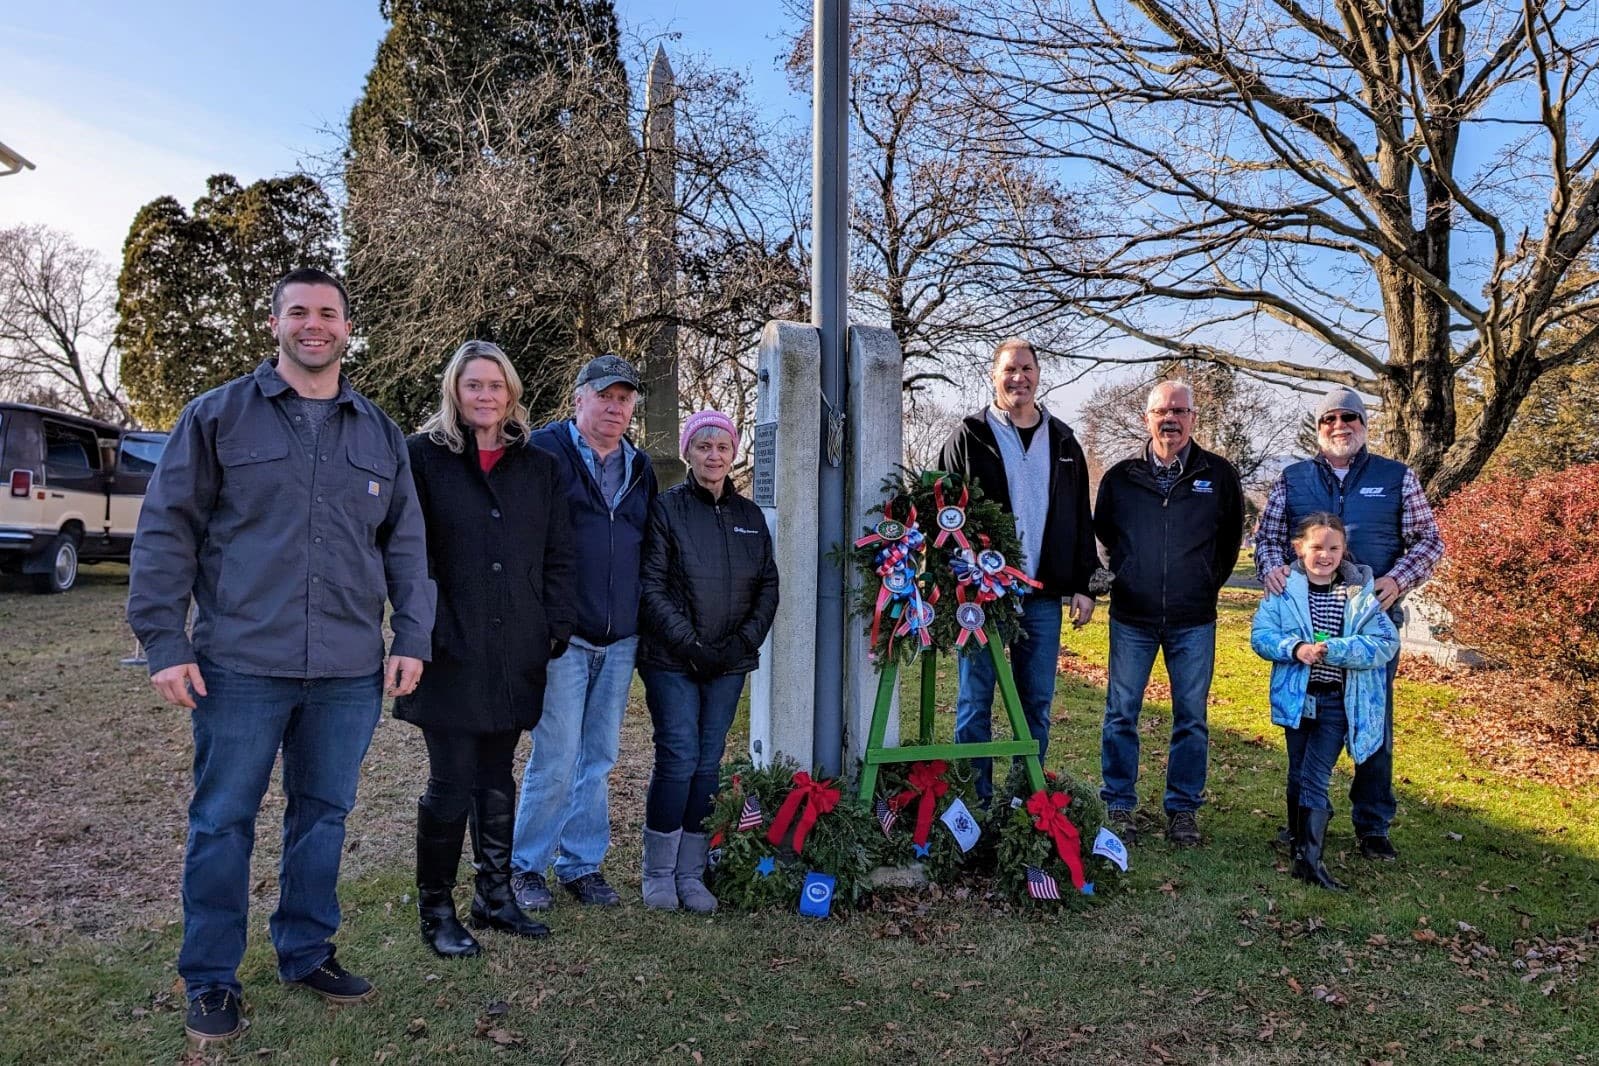 UGI employees and family posing for picture by veteran grave with wreath and ribbons